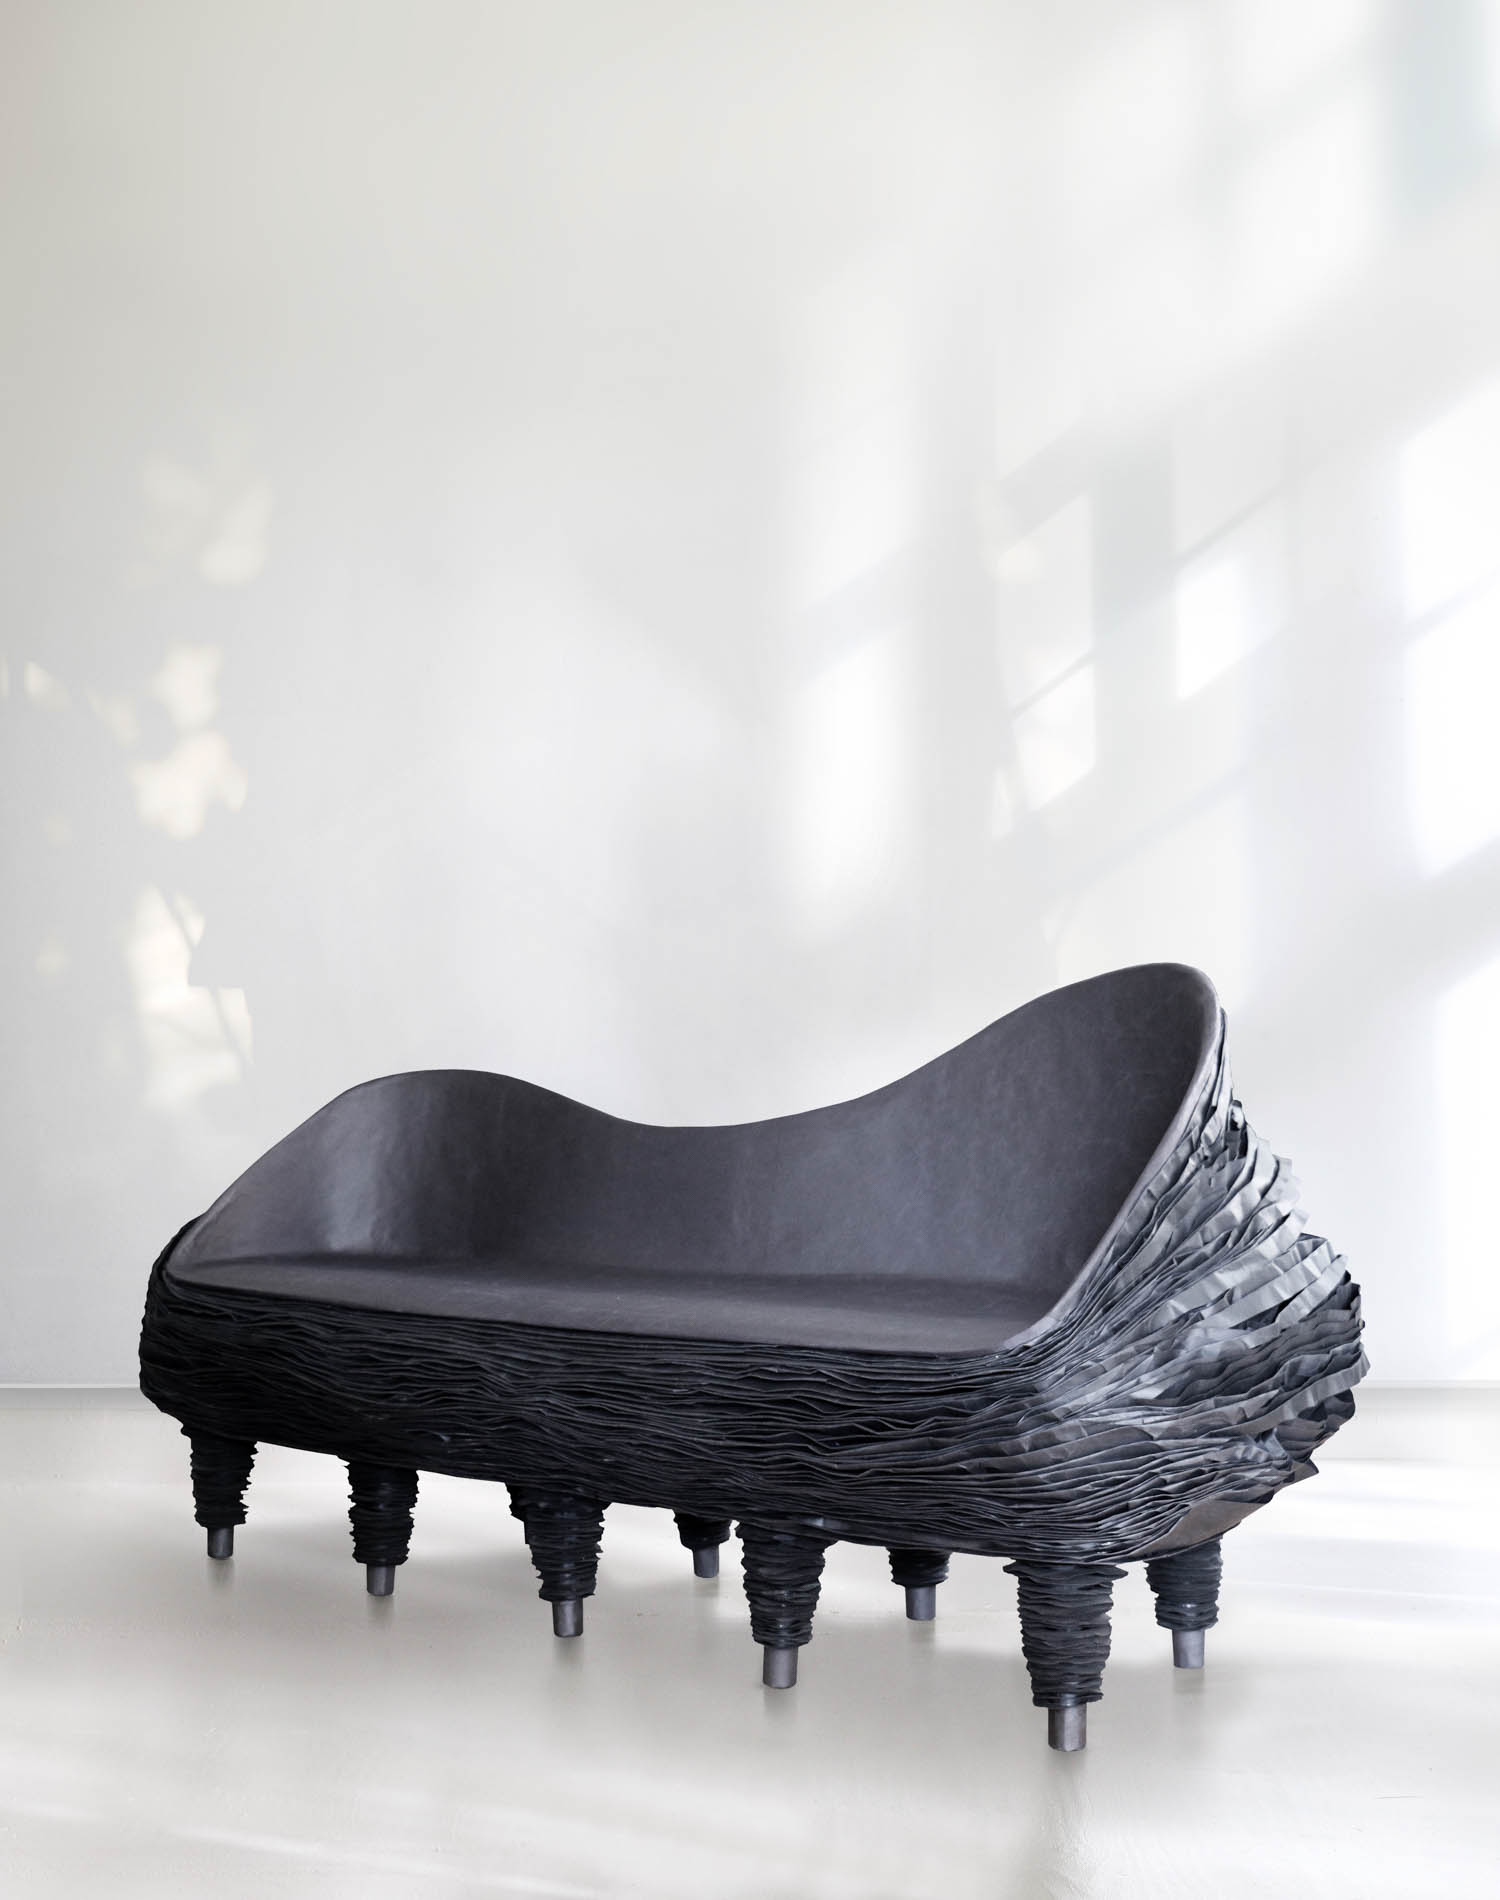 The Duolly sofa in black.